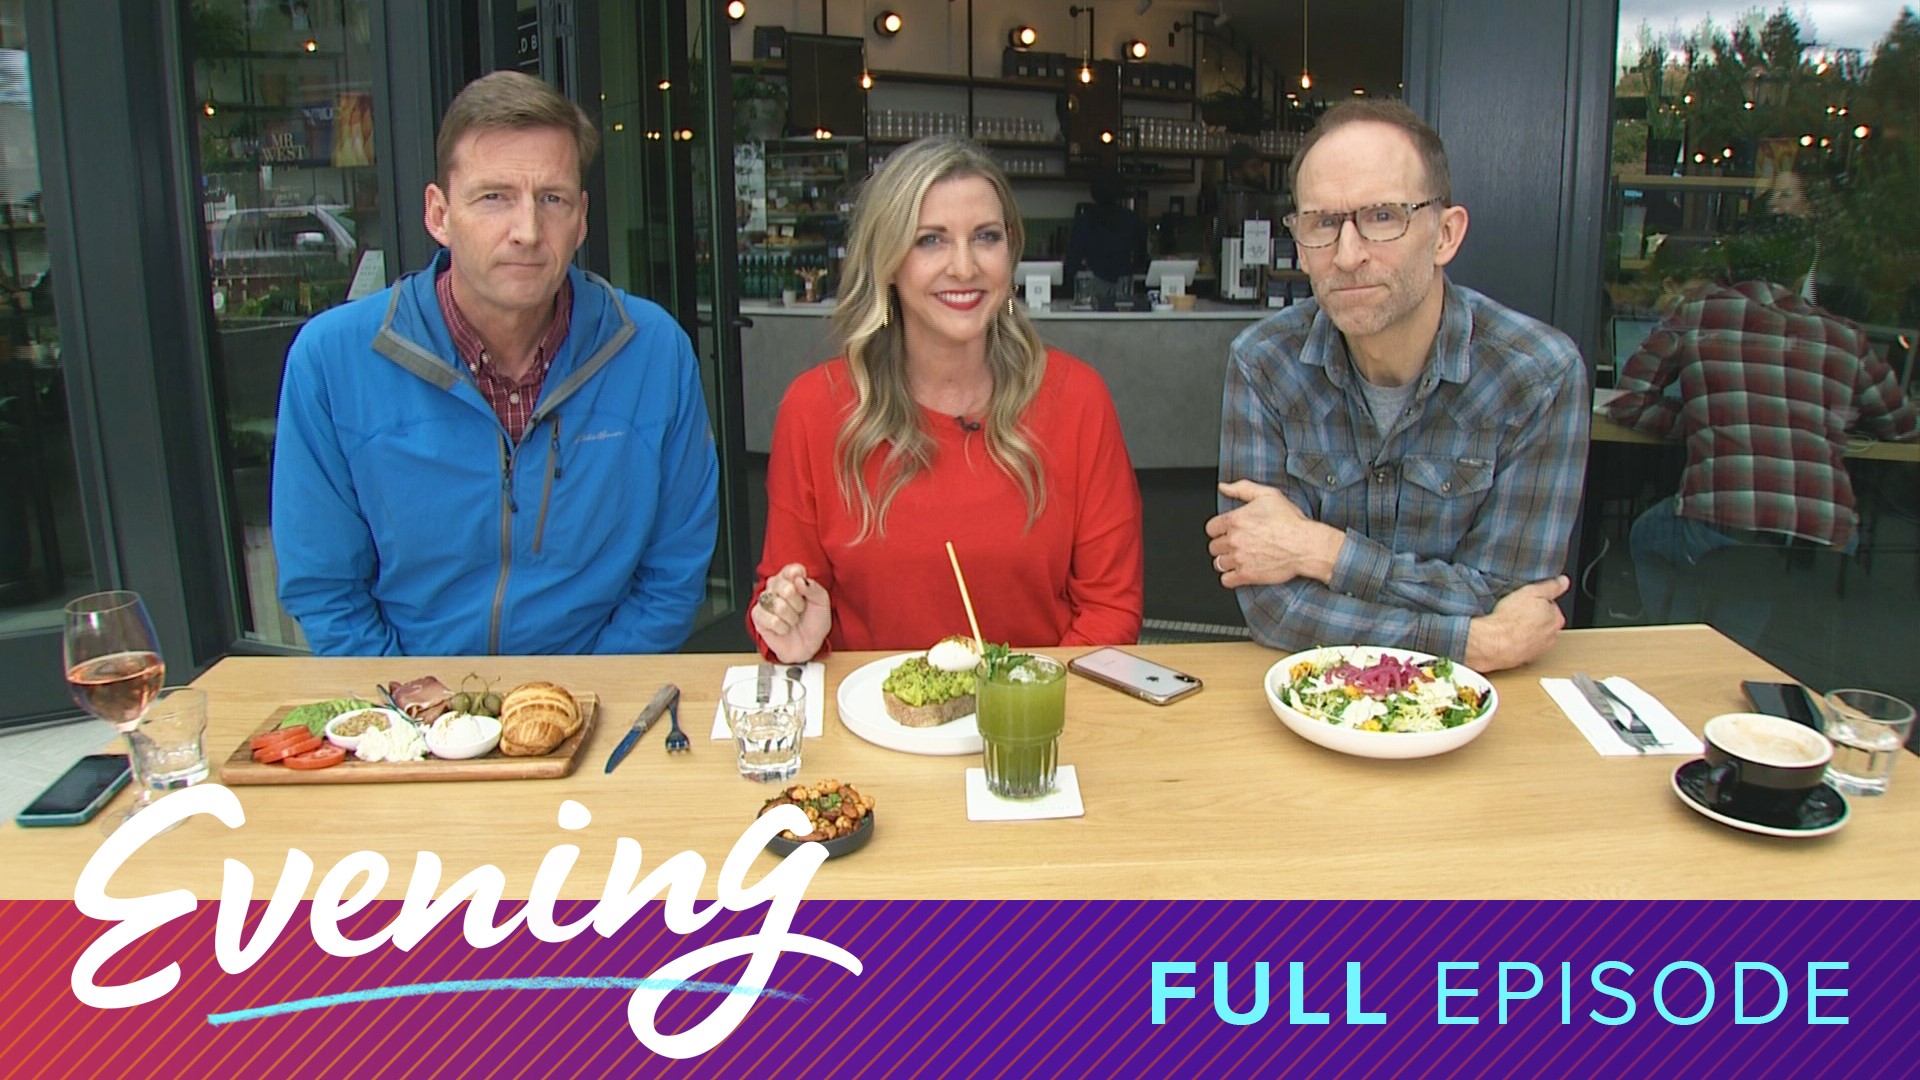 Saint Bryan, Kim Holcomb and Michael King host from Mr. West at University Village. FEATURING: Unreal Estate: Seaward Park, Roam Beyond Trailer Camping, Grocery List